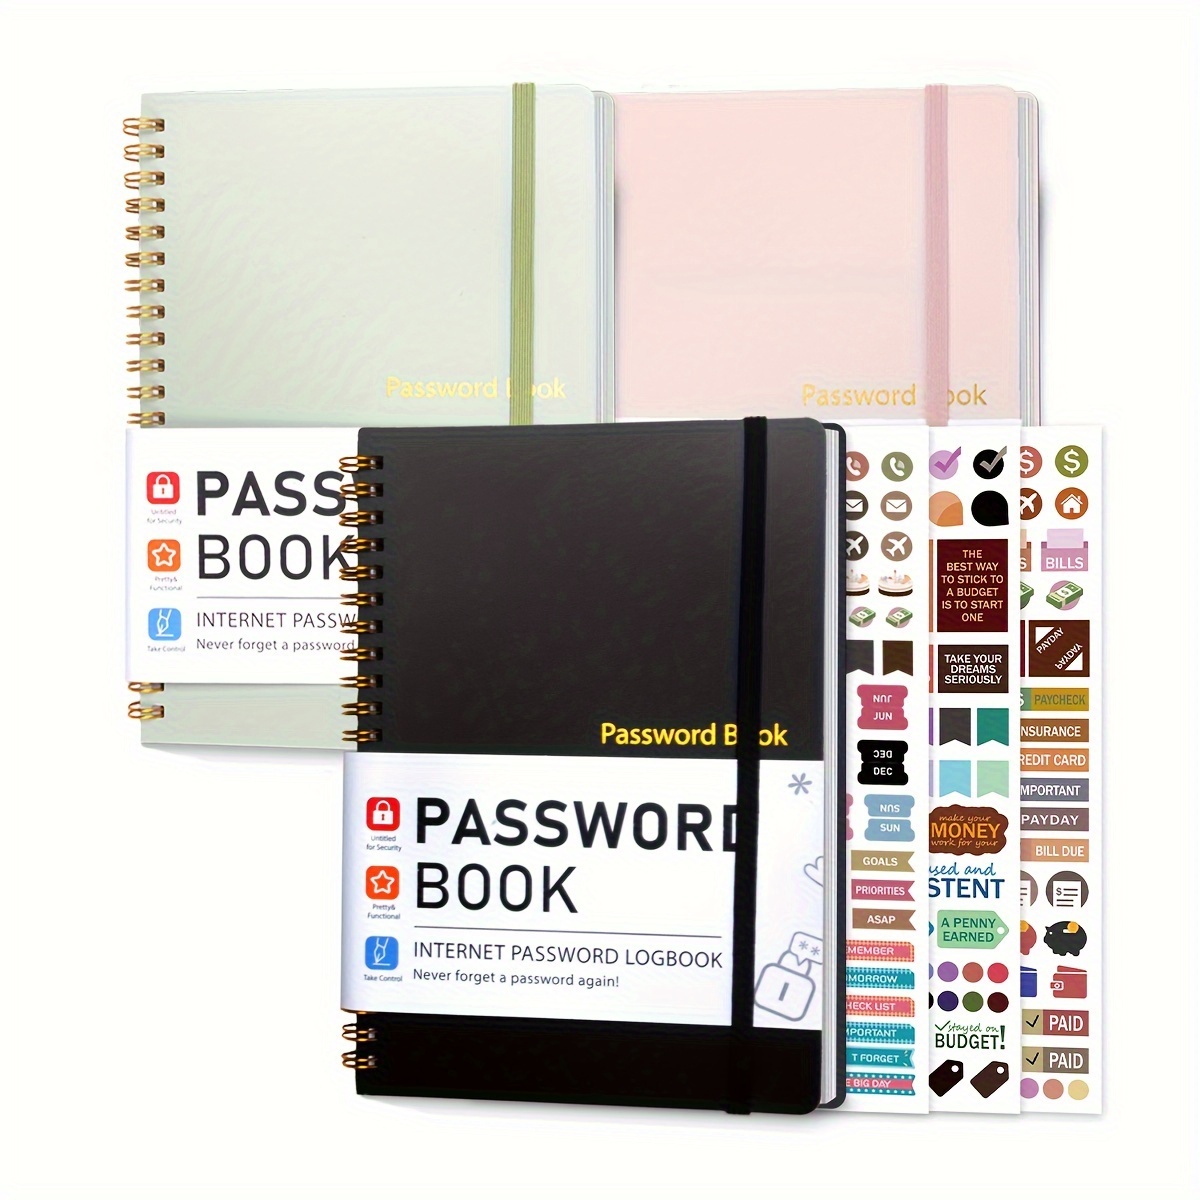 

1pc Password Book With Wrist Strap, Waterproof Cover, Twin-wire Binding & Double-sided Pocket, Includes Stickers, For Secure Internet Login & Personal Information Organization